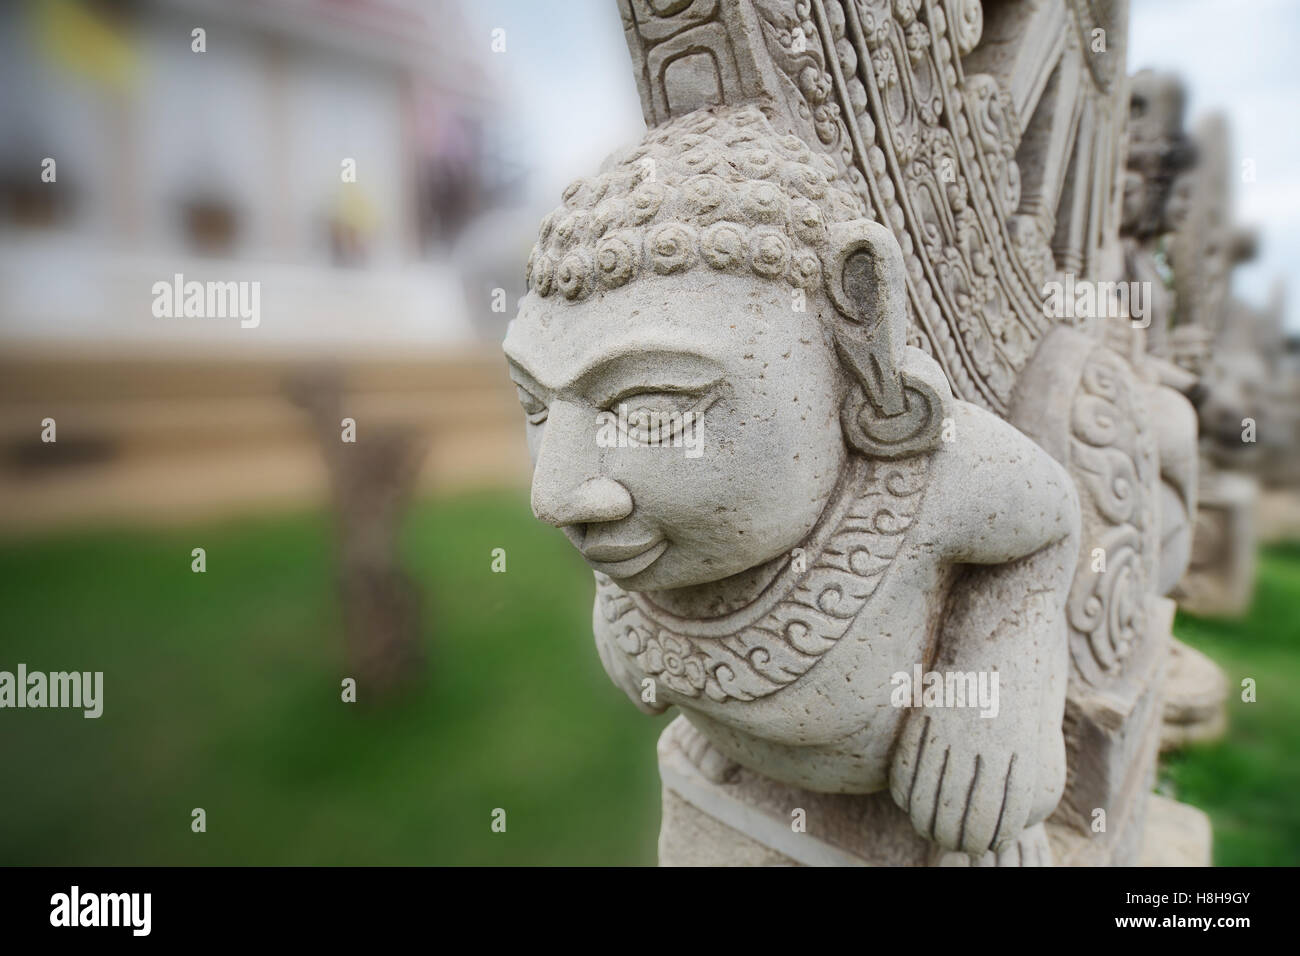 Stone statue imitating art of Asian ancient located in the outdoor area of temple. Stock Photo